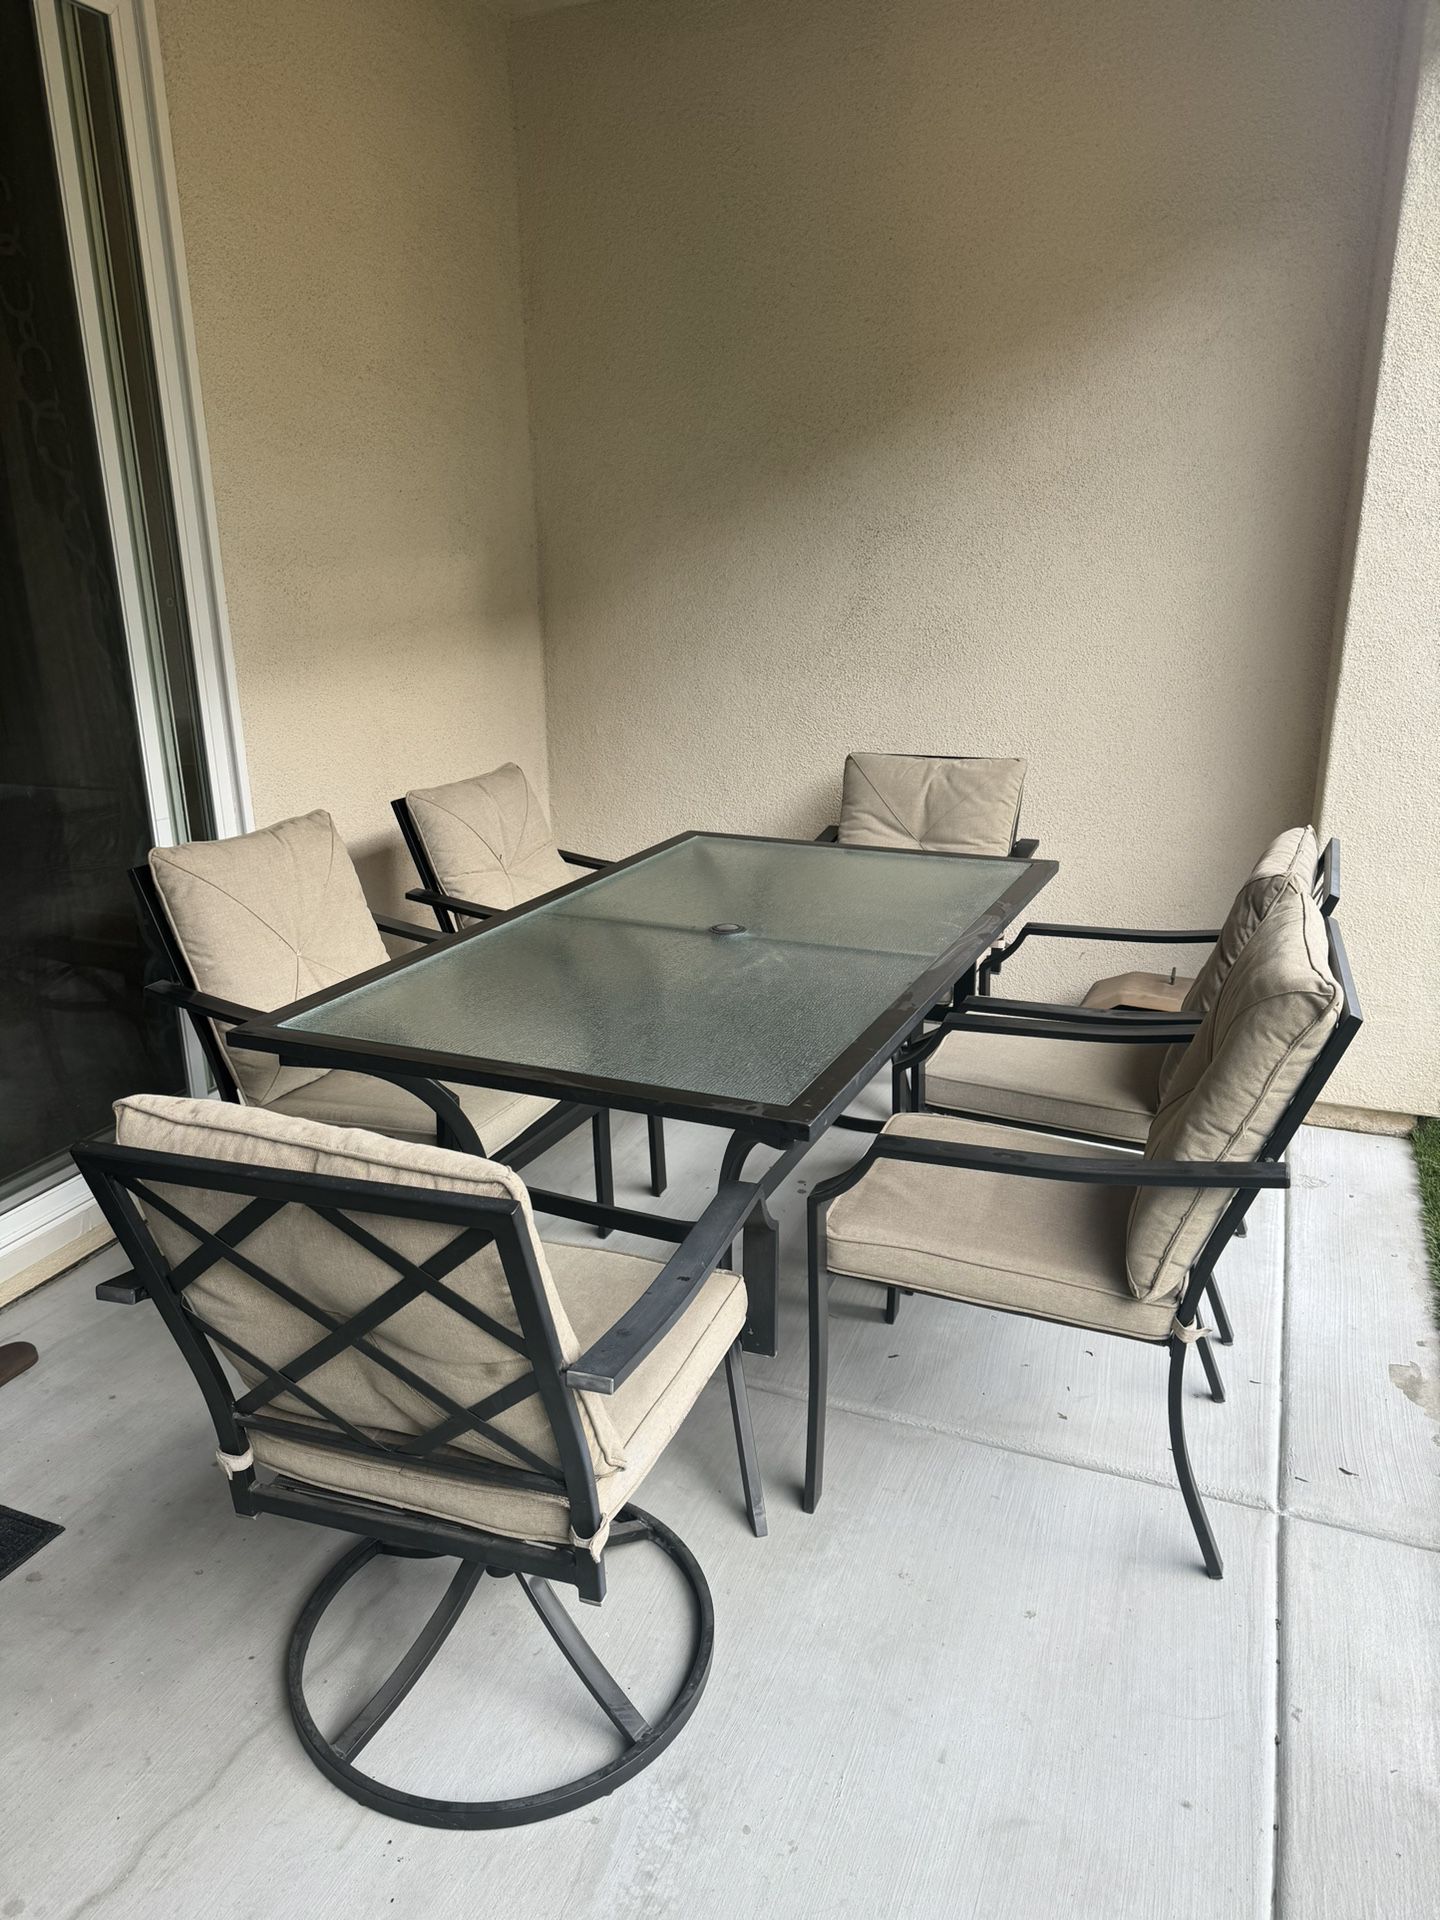 Patio Furniture Set 6 Chairs